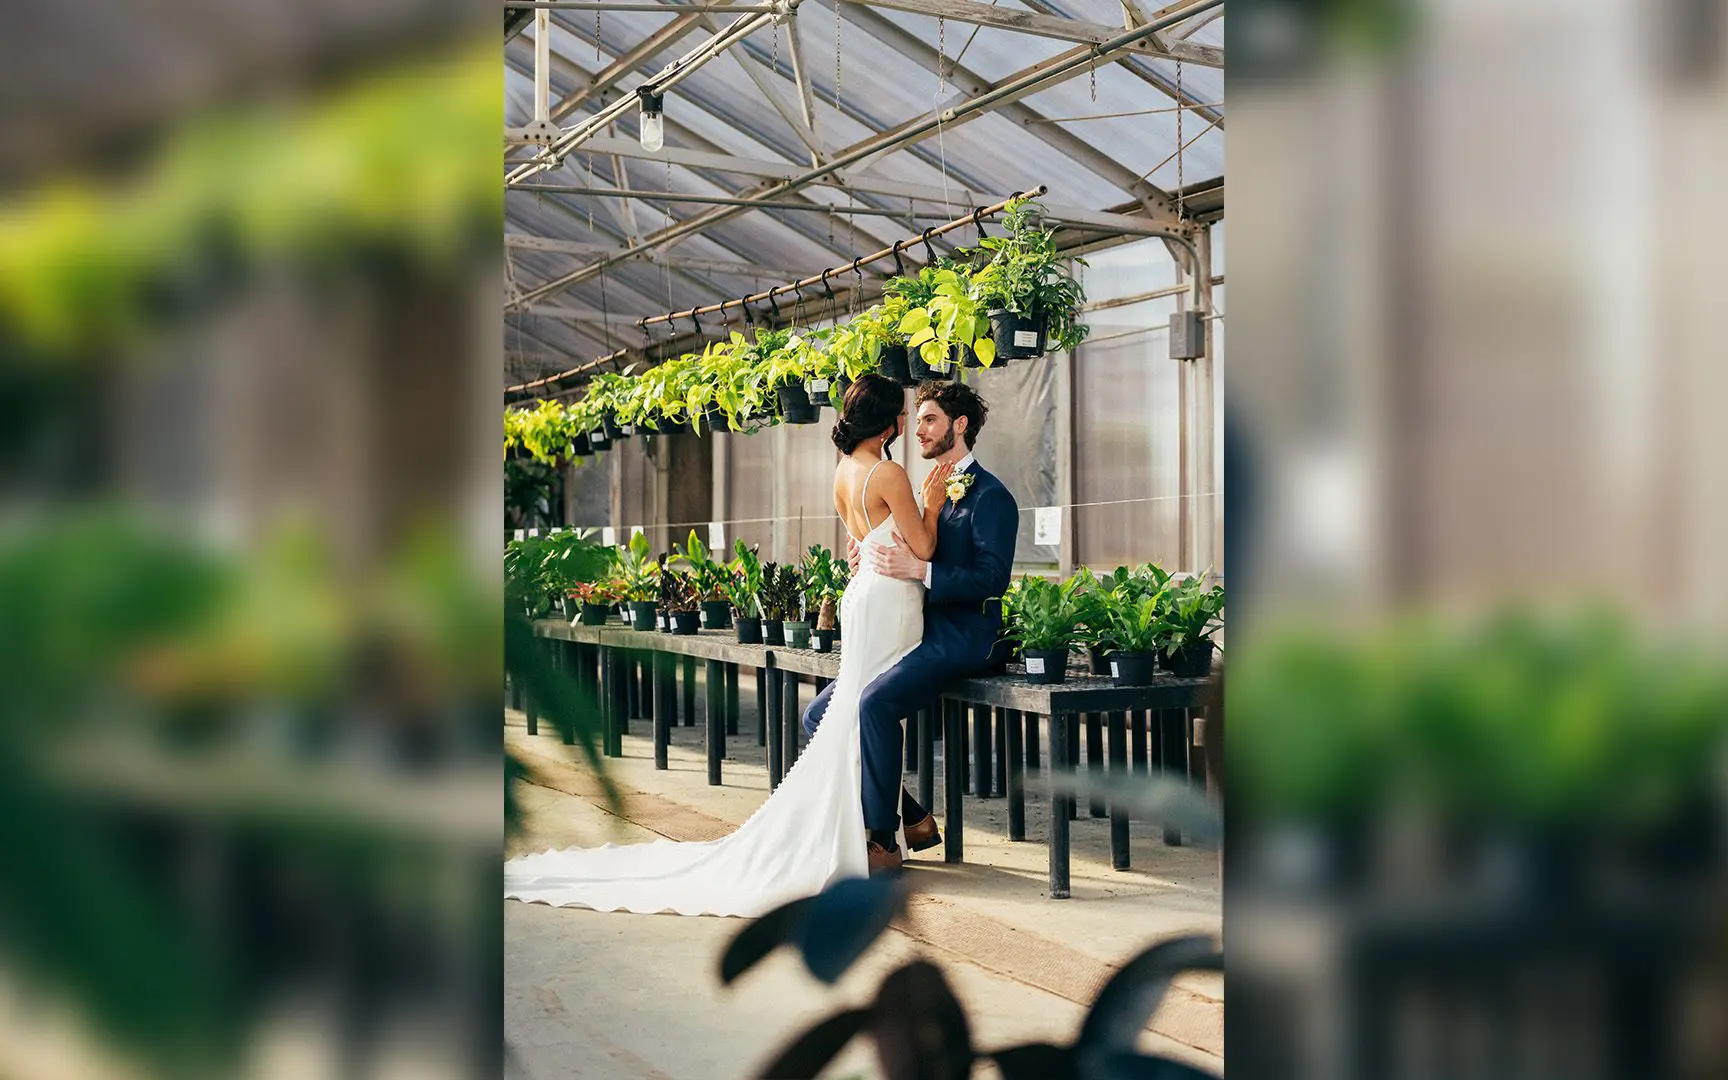 A bride and groom embracing in a sunlit greenhouse surrounded by hanging plants and rows of potted greenery.